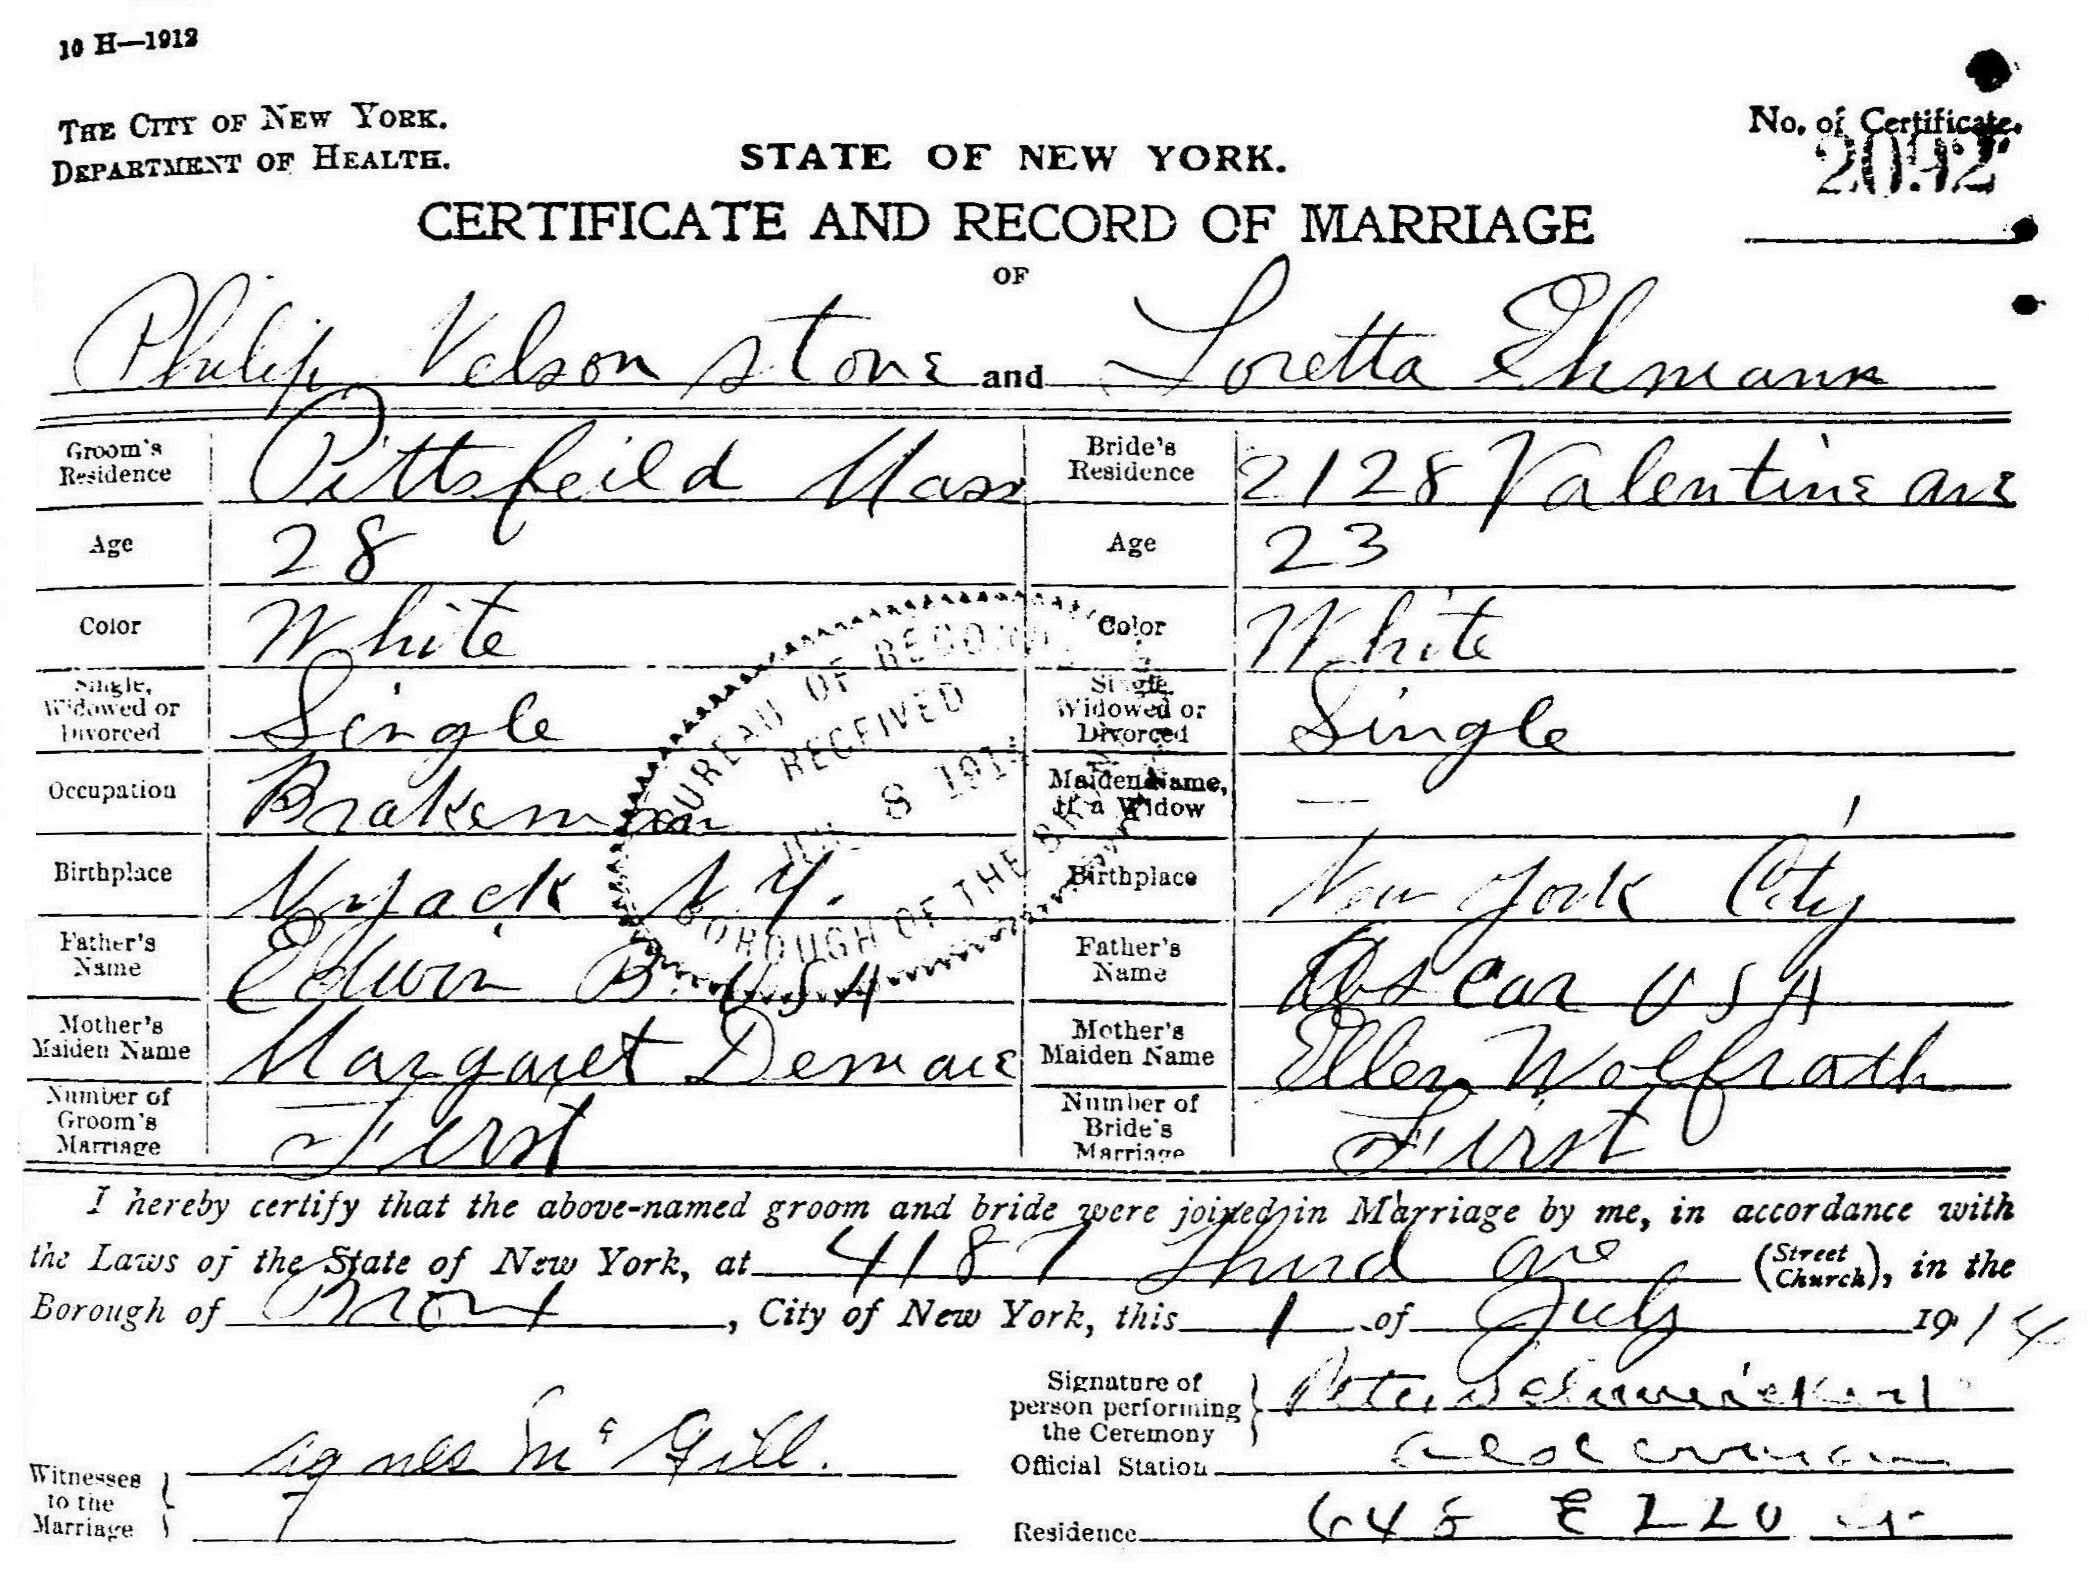 Marriage certificate of Philip Nelson Stone and Loretta Elsie Ehmann, 1914